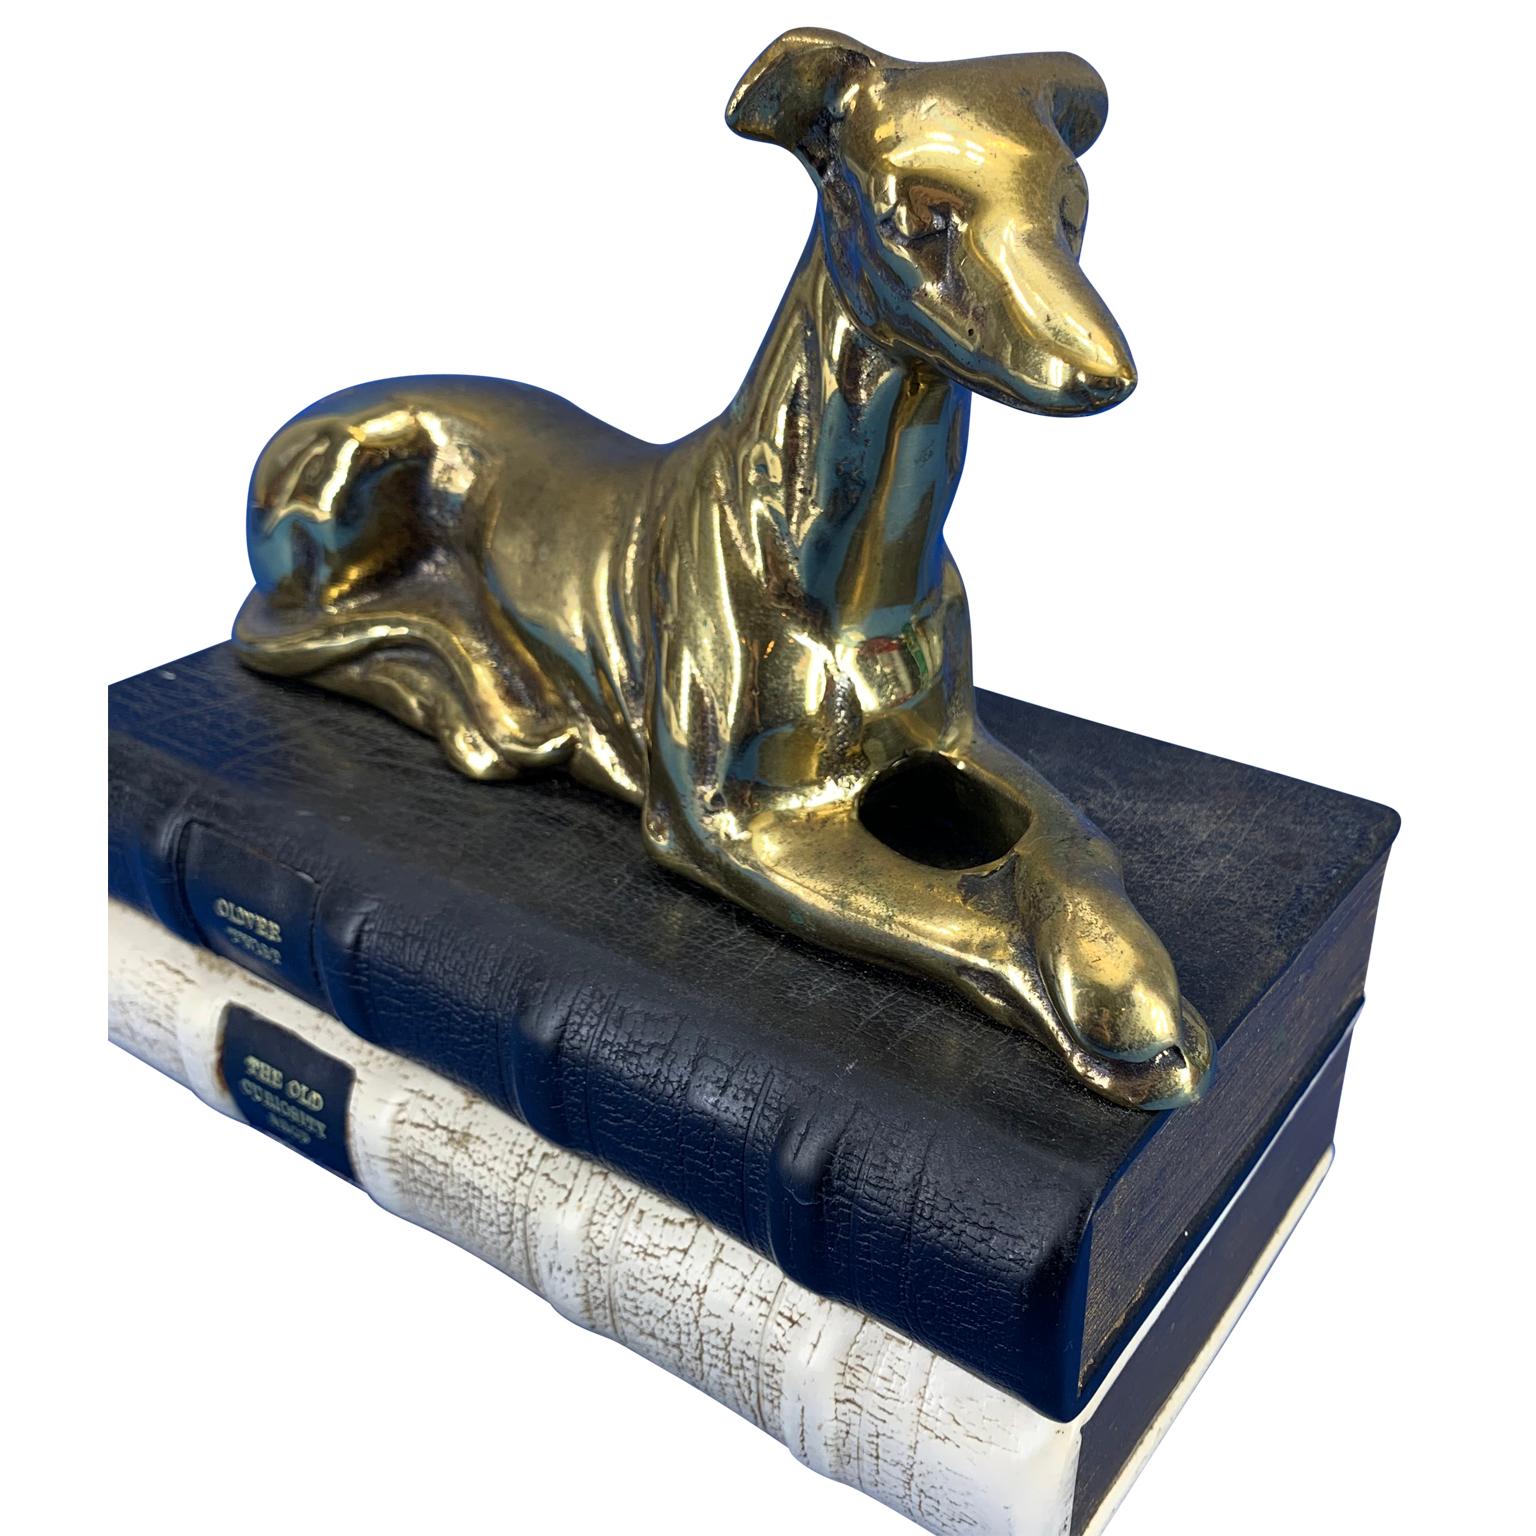 Brass greyhound table lamp by Thomas Blakemore, Walsall, England

Greyhound is lying on two ceramic books, Oliver Twist and The Old Curiosity Shop.